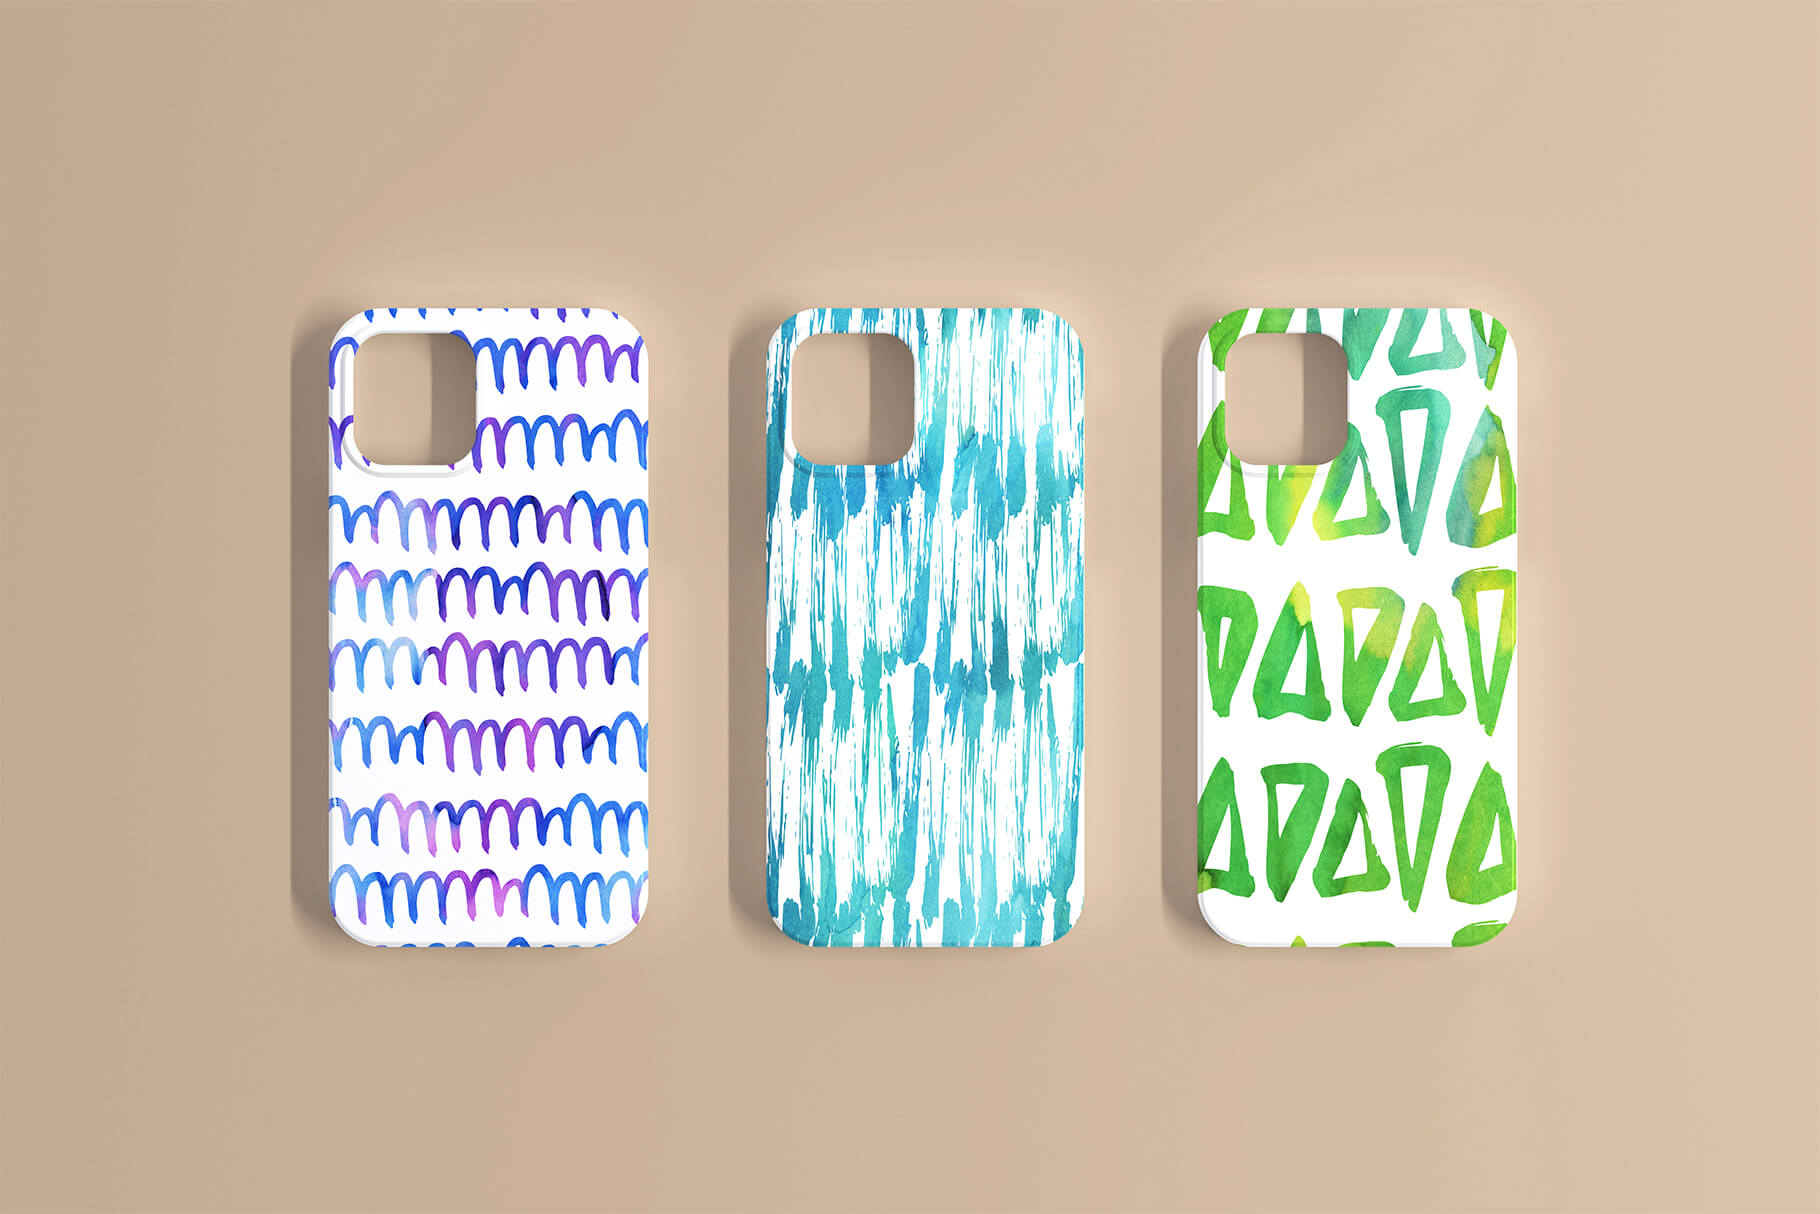 Mockup Preview - Phone Covers